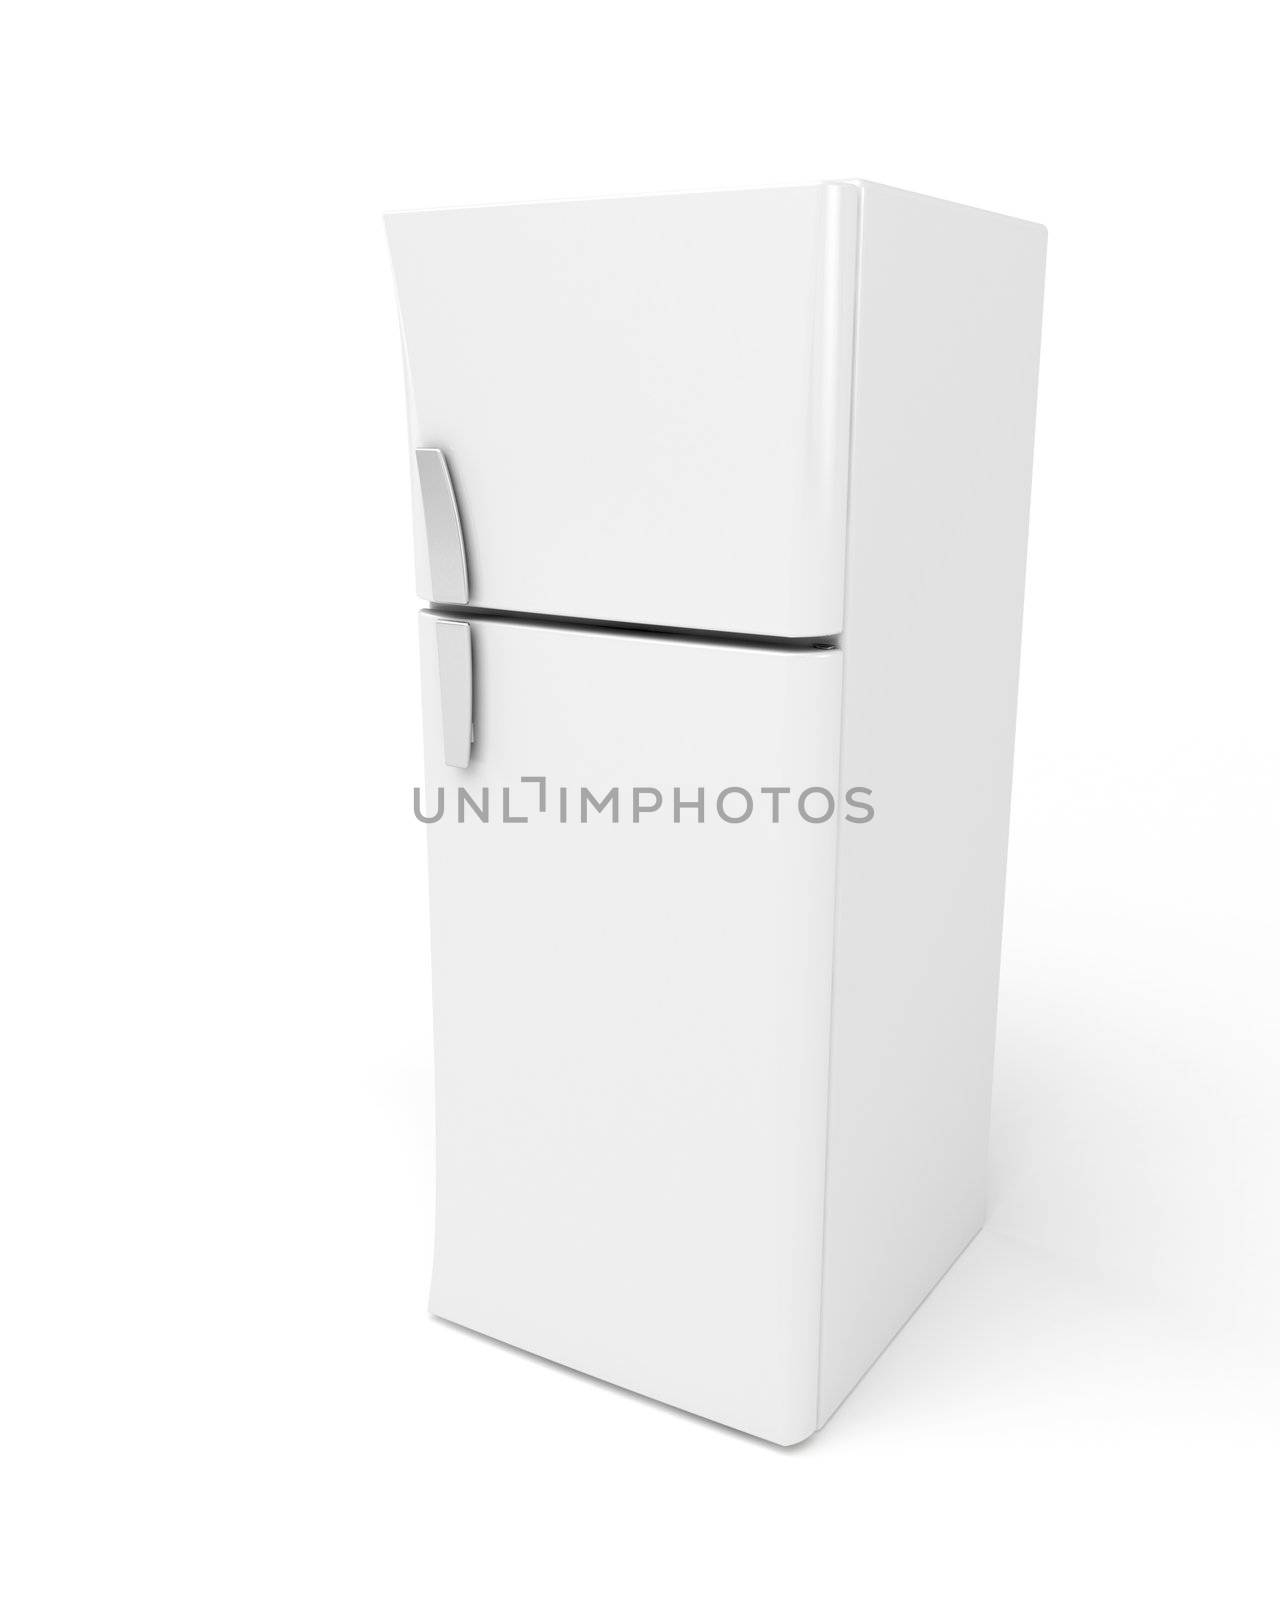 Fridge by magraphics